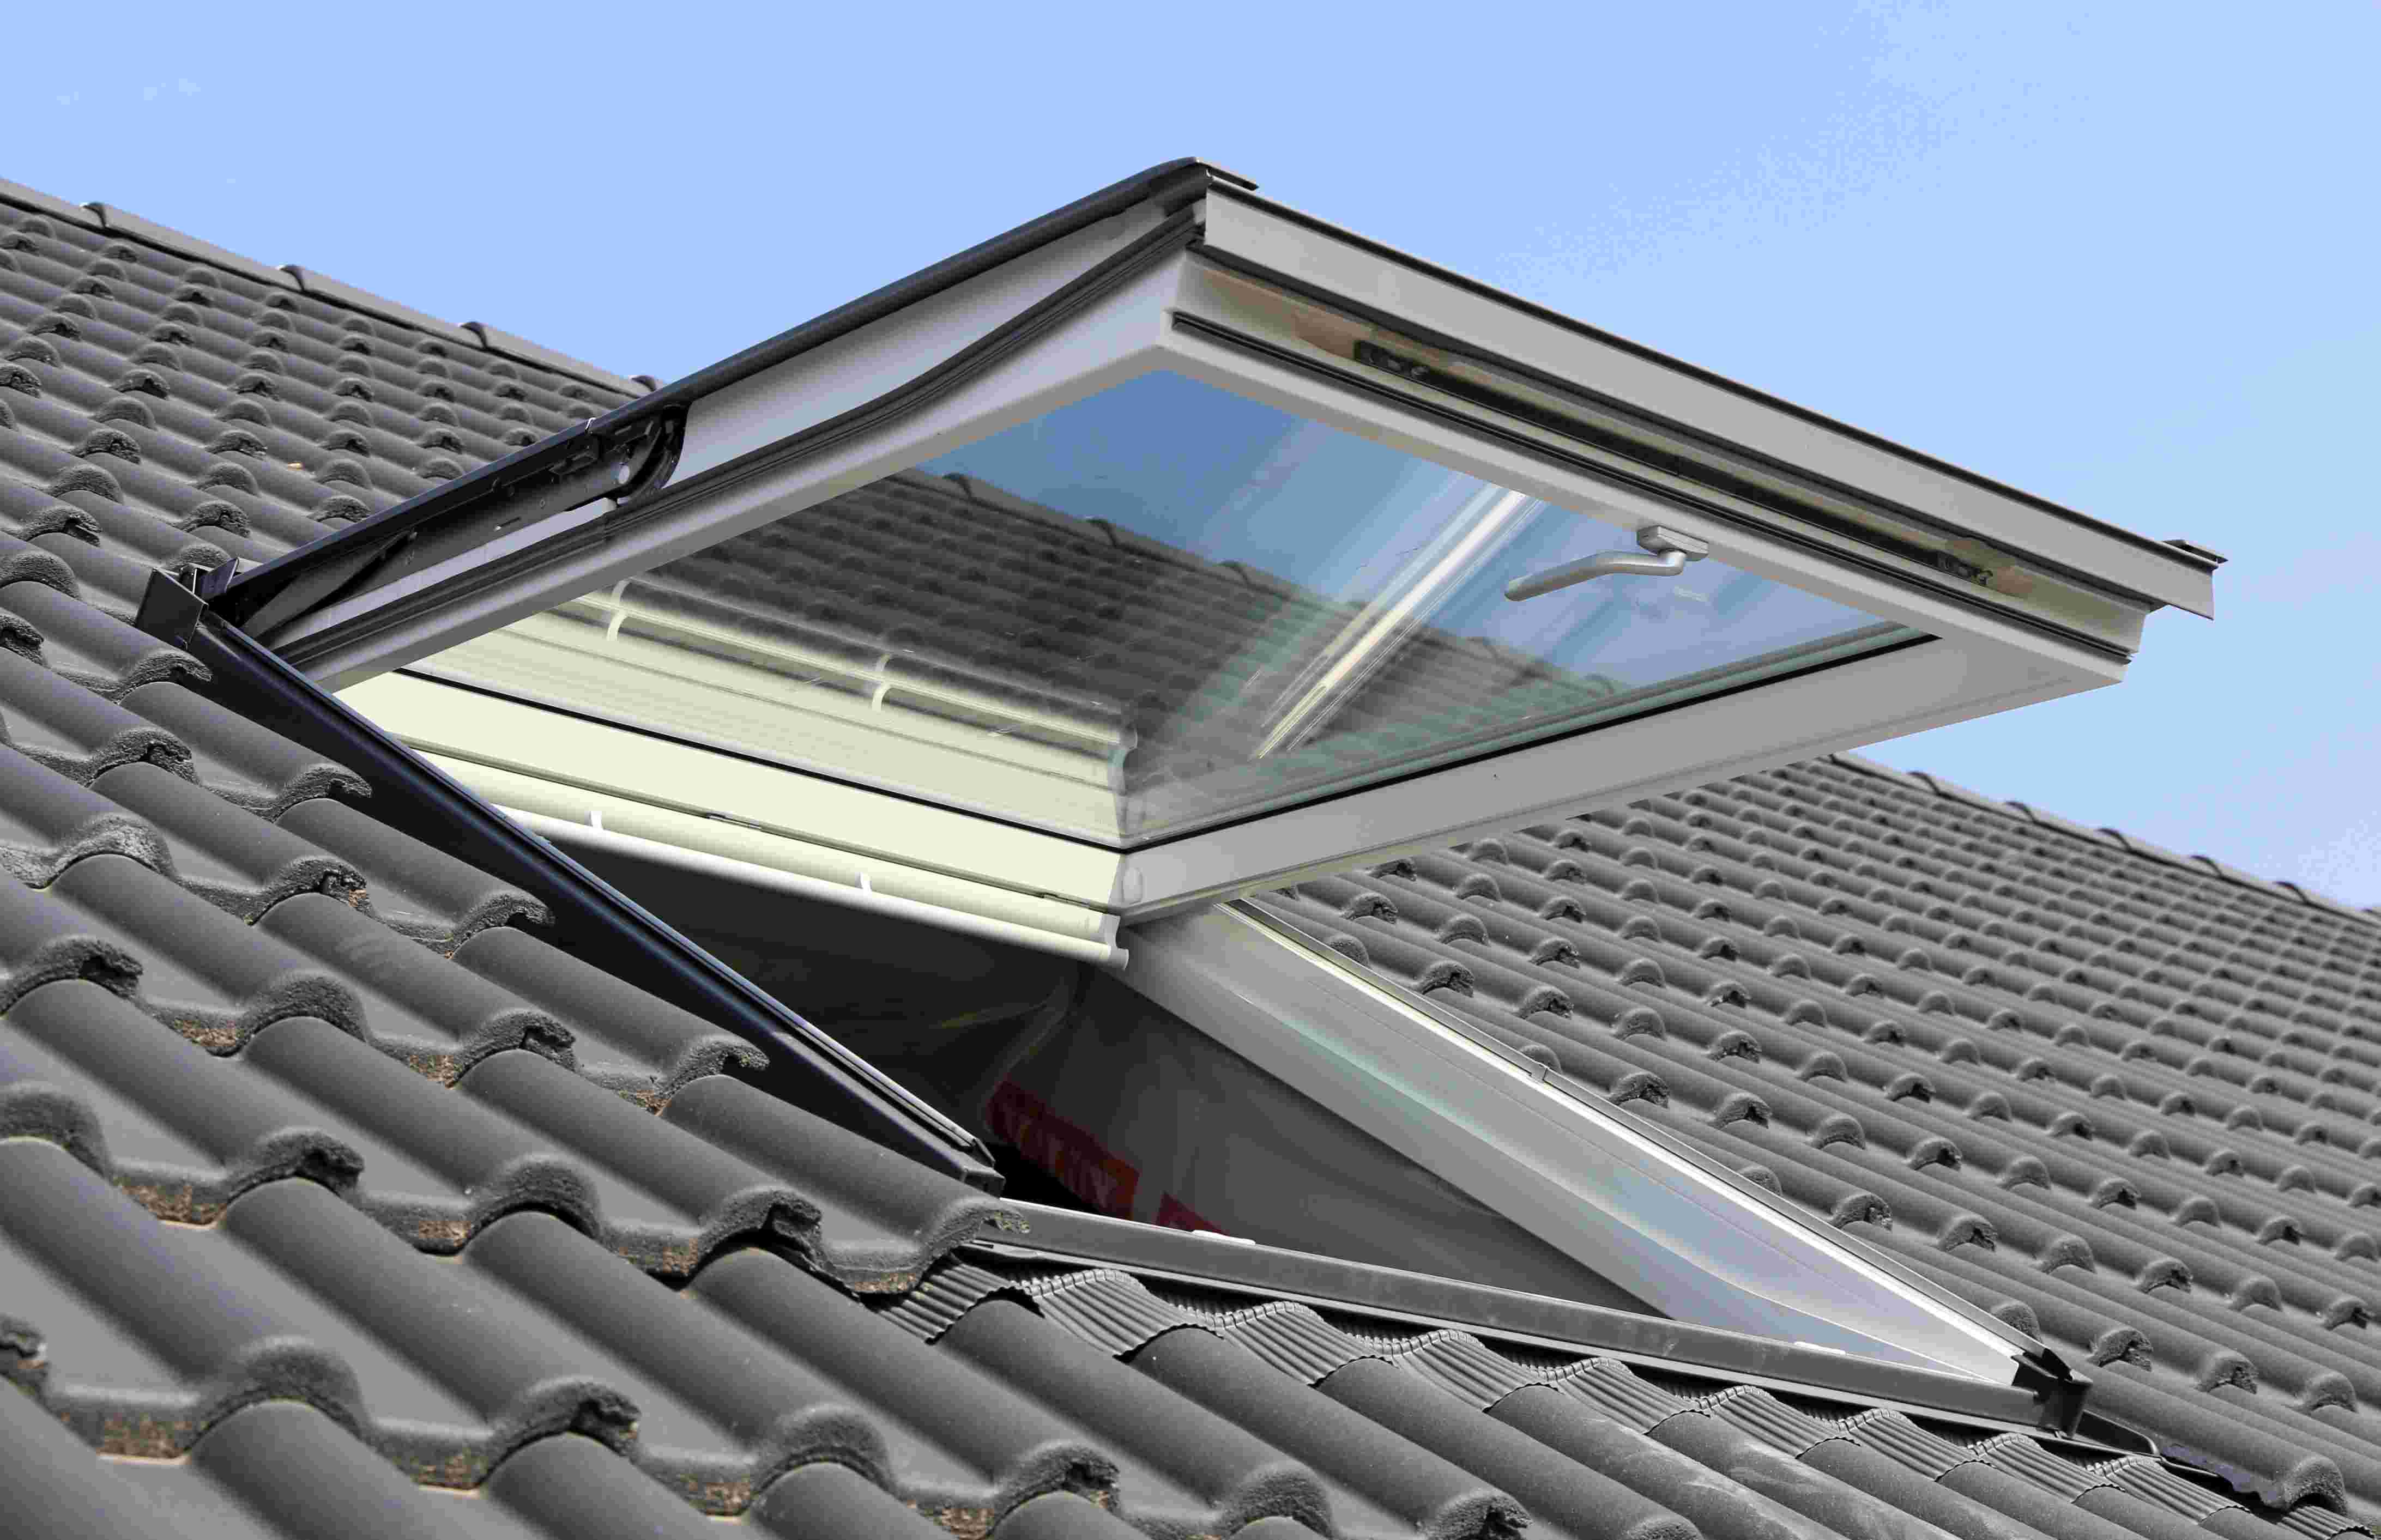 Rooflight open on a pitched roof